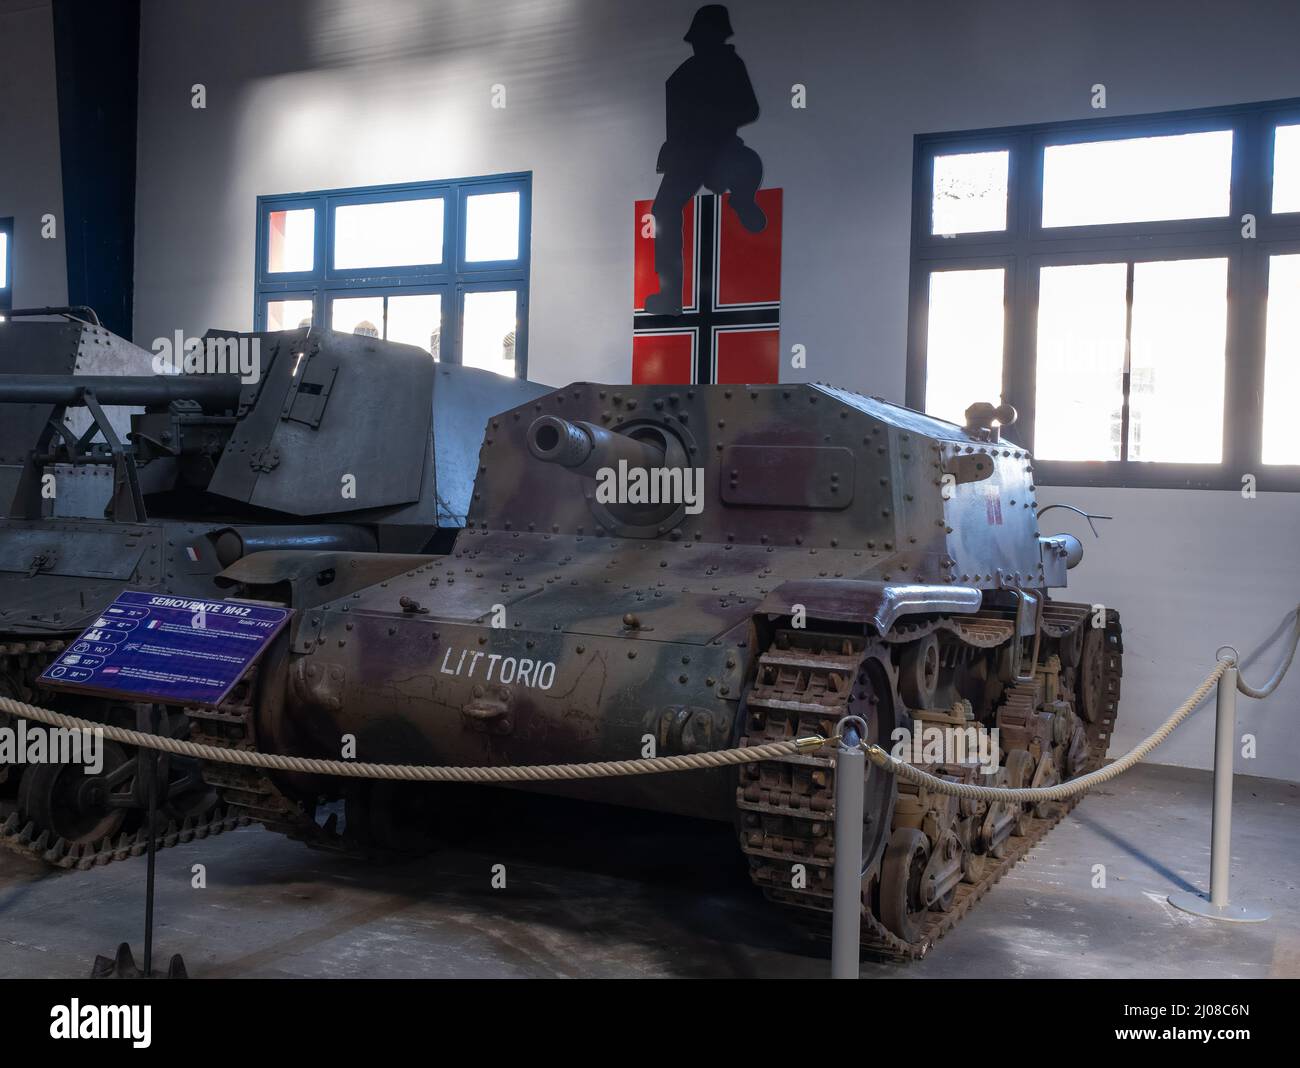 Saumur, France - February 26, 2022:  Italian Semovente M42 (anti tank weapon). Tank museum in Saumur (Musee des Blindes). Second world war exhibition. Stock Photo